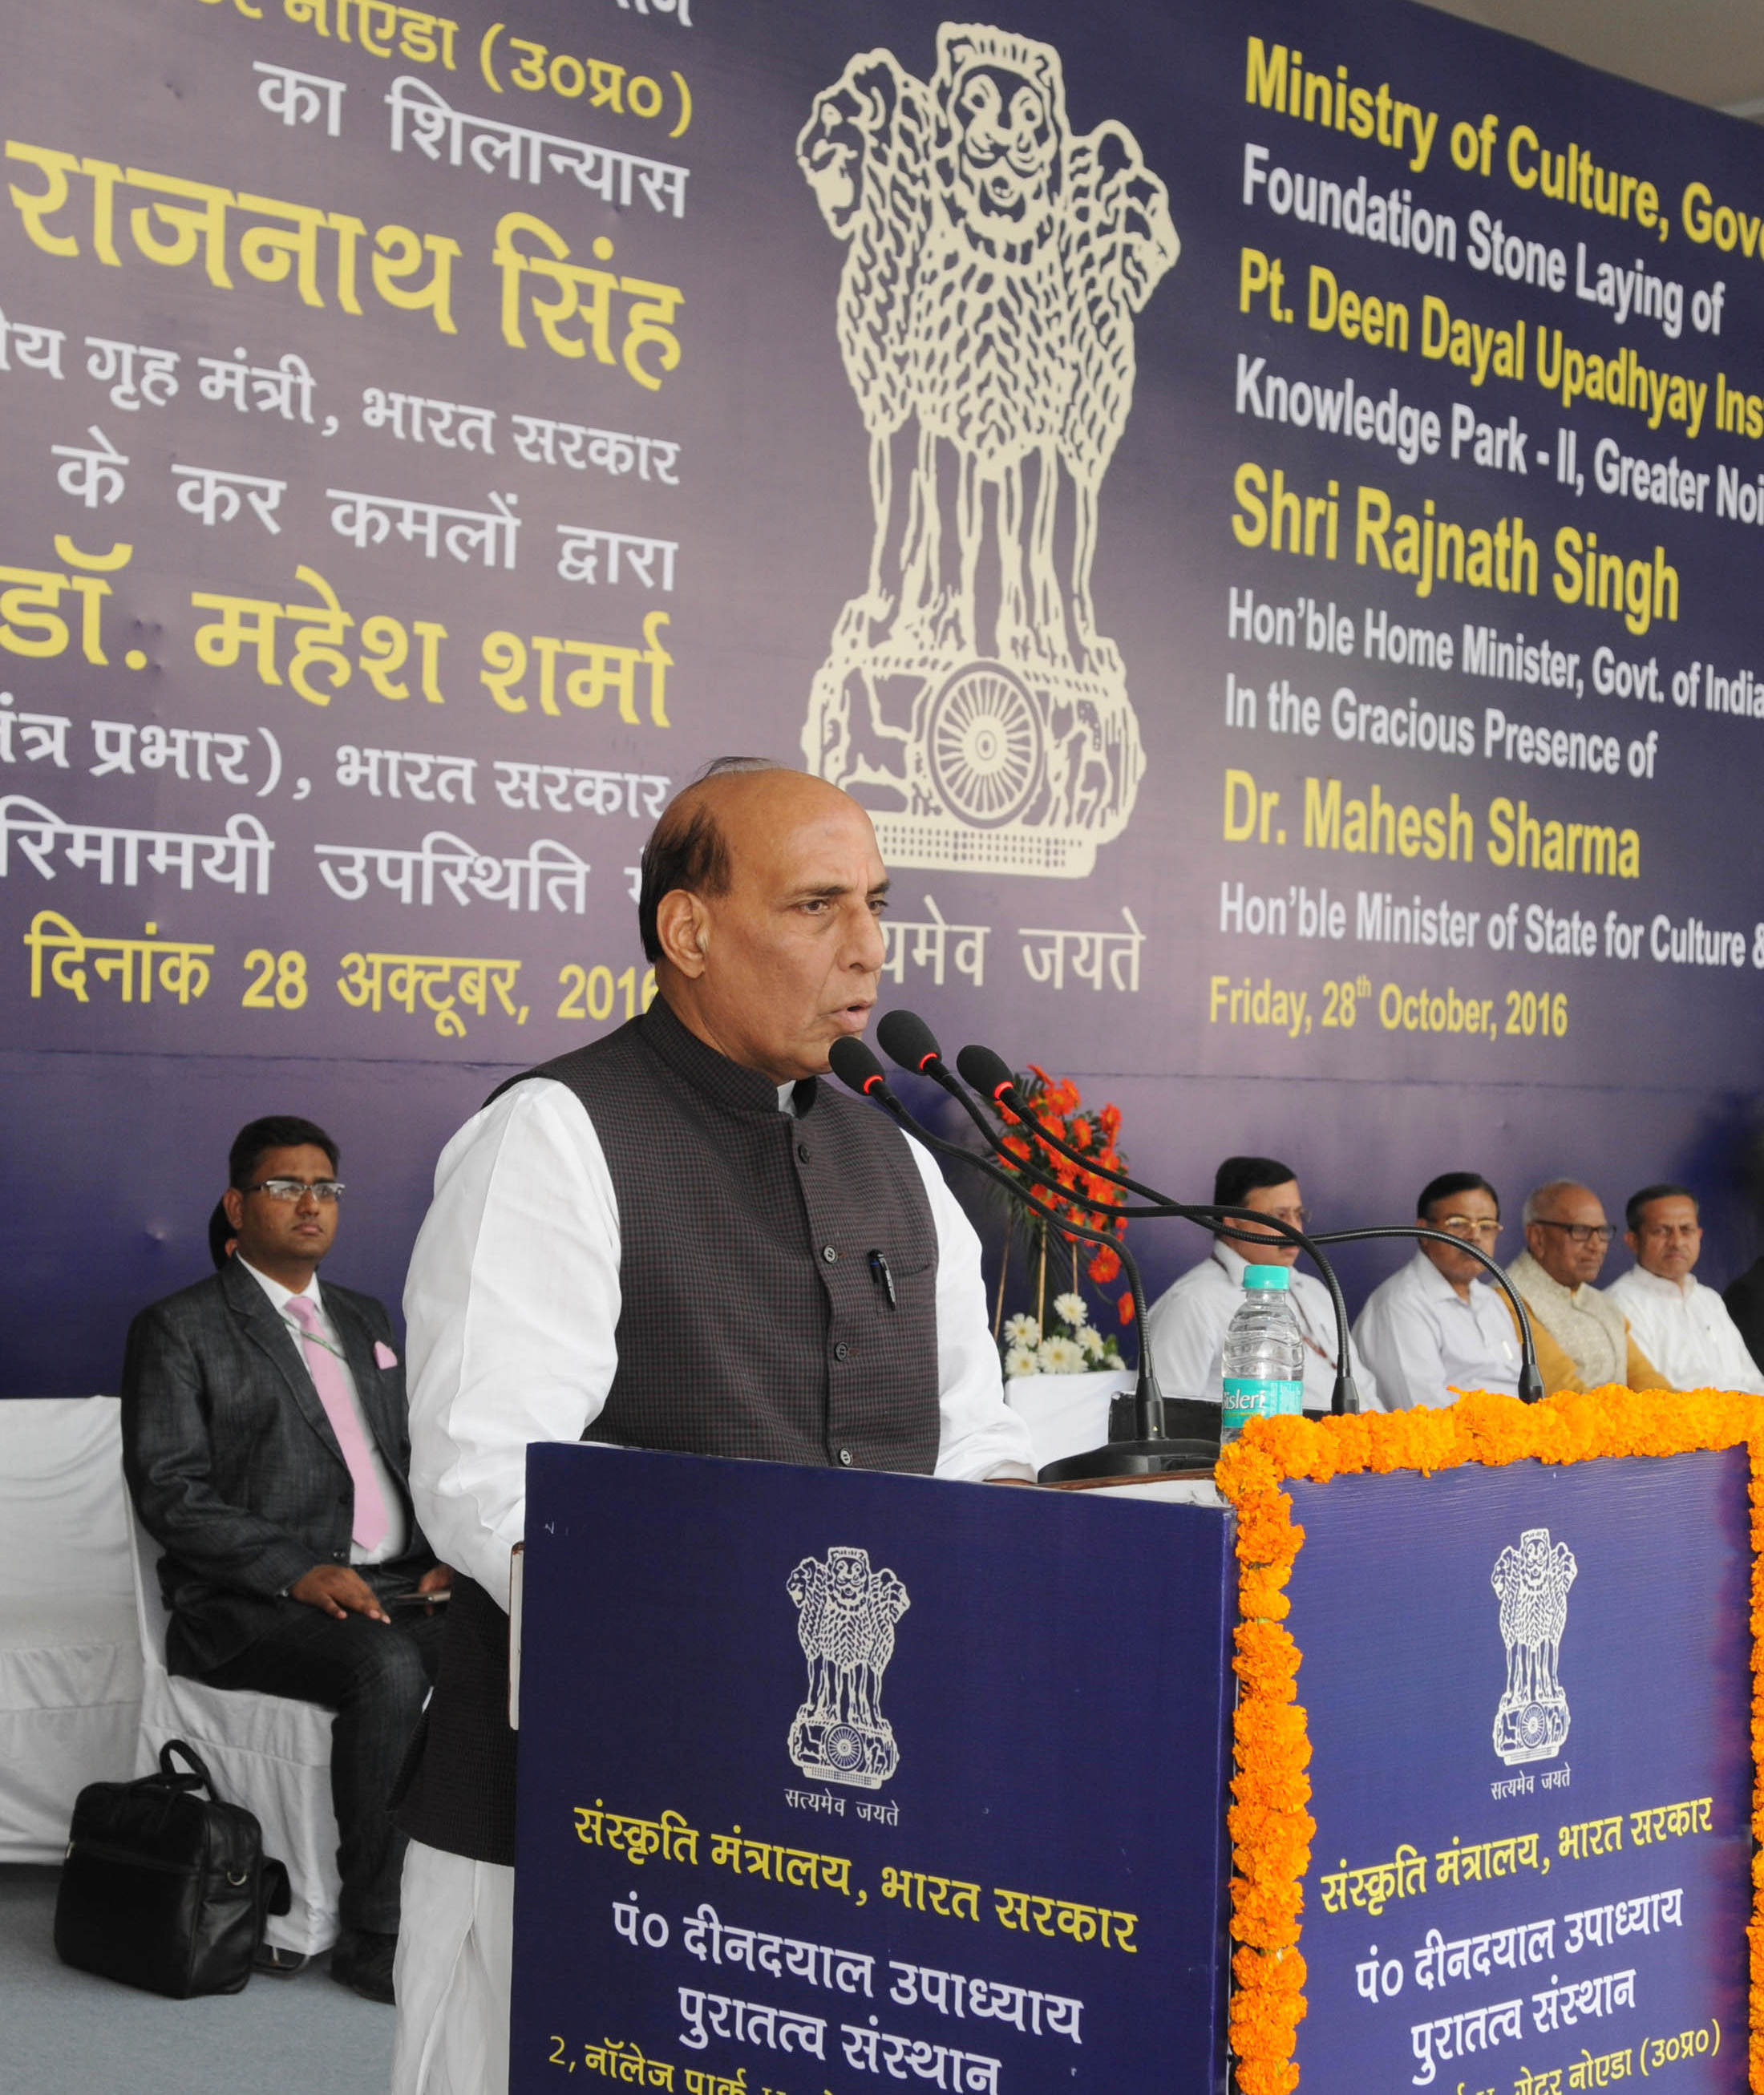 The Union Home Minister, Shri Rajnath Singh addressing at the foundation stone laying ceremony of Pt. Deen Dayal Upadhyay Institute of Archaeology, Archaeology Survey of India, in Greater Noida, Uttar Pradesh on October 28, 2016.